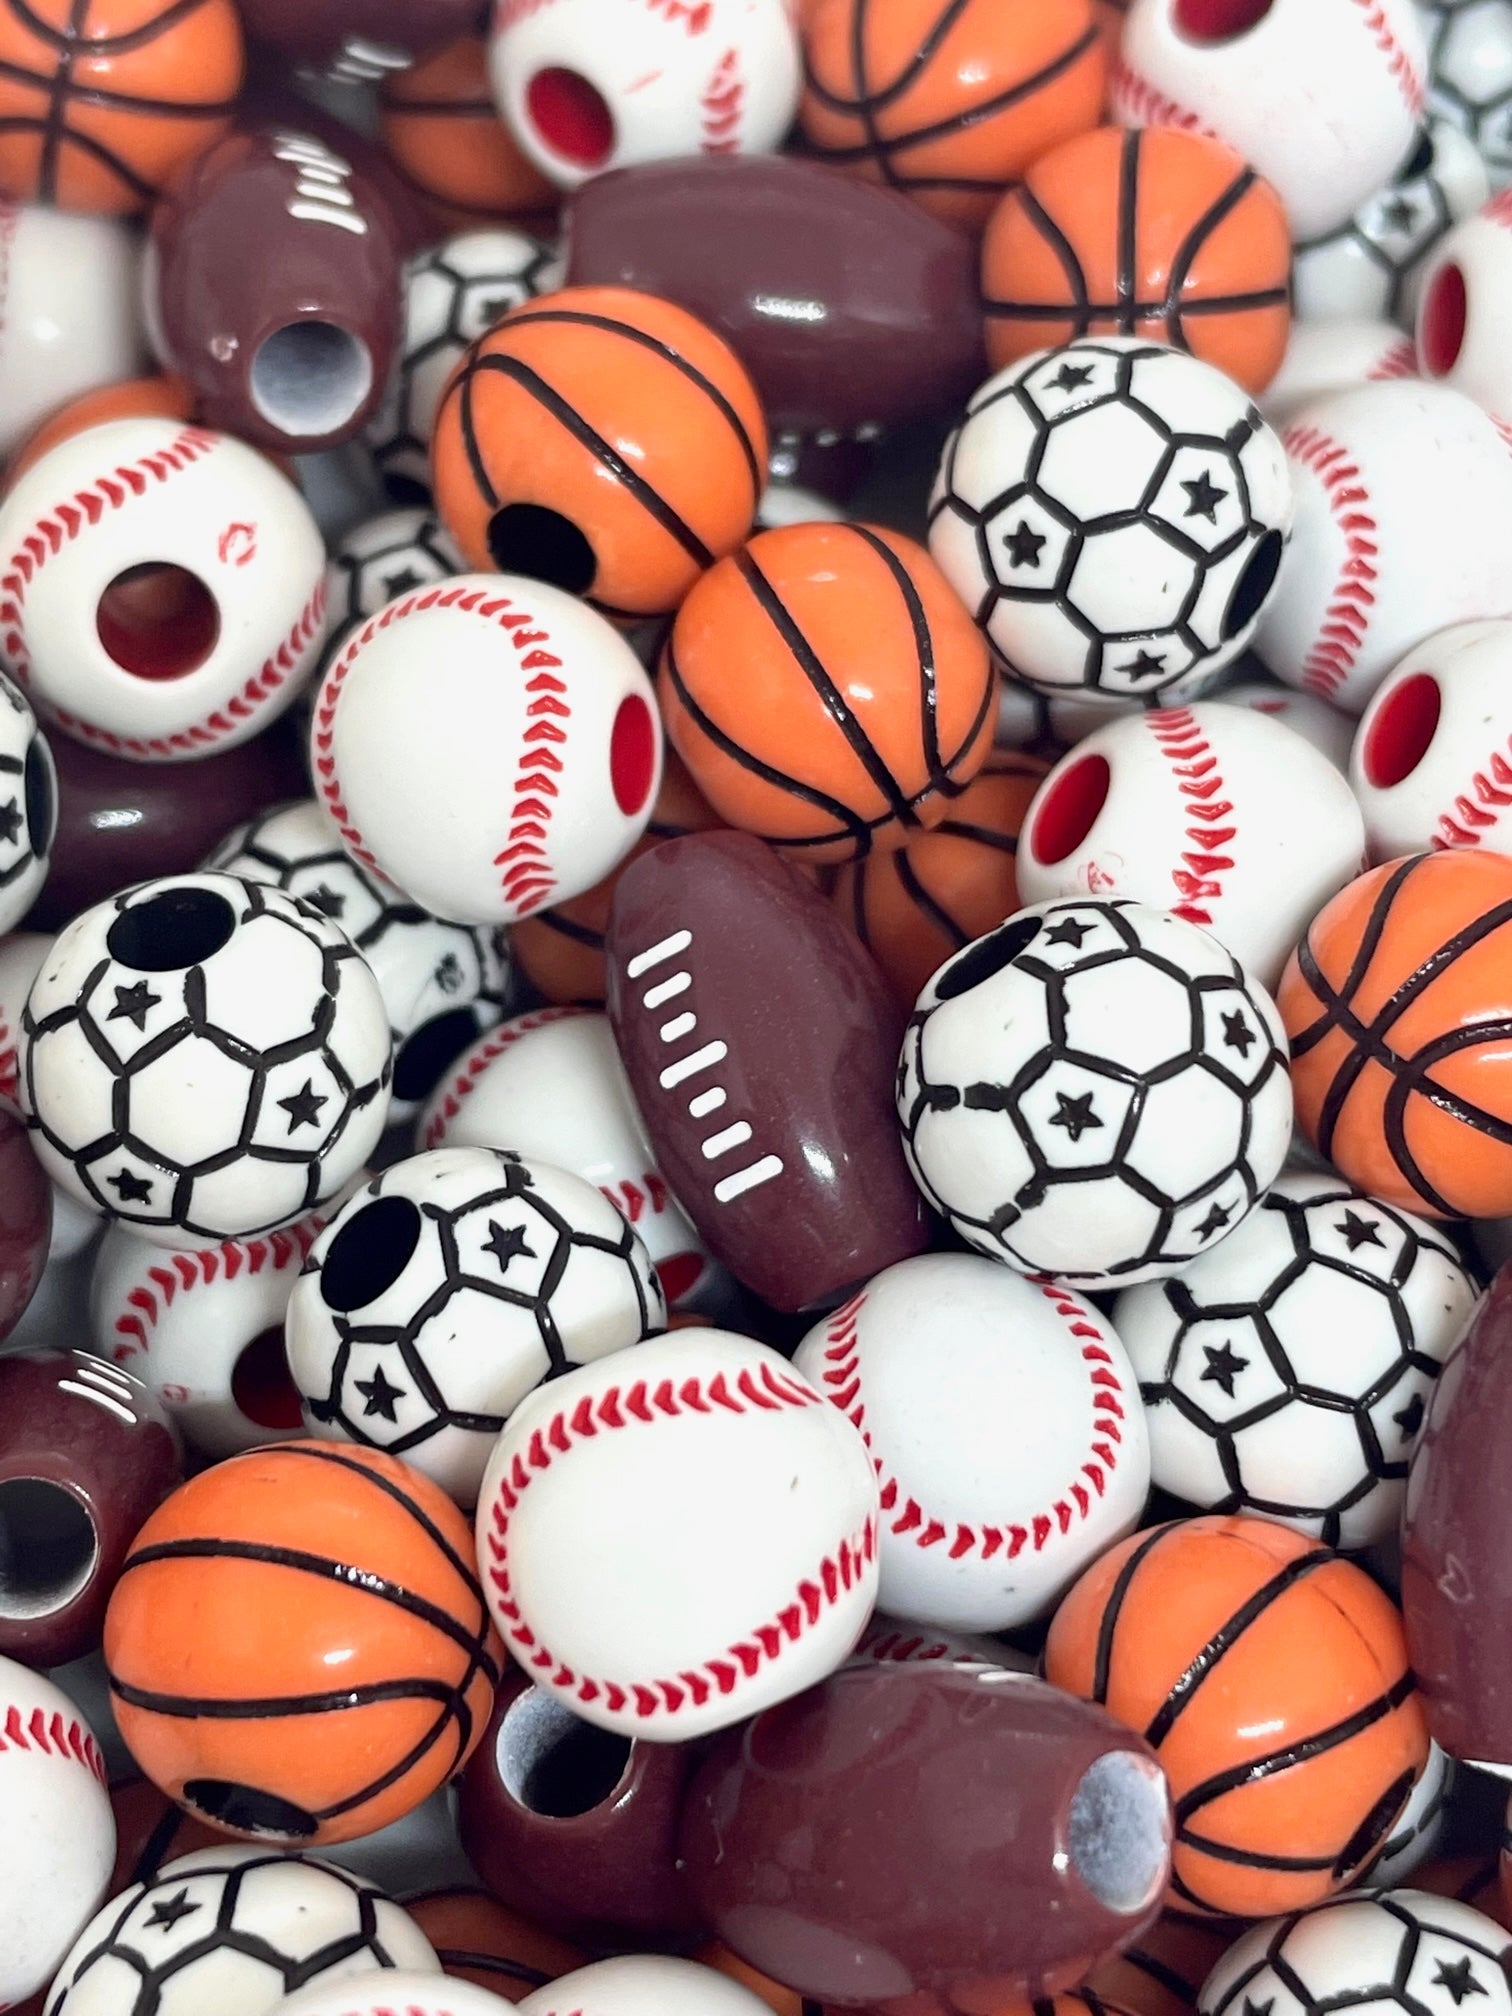 Celebrate the Game: Sports Ball Beads at Madison Beads